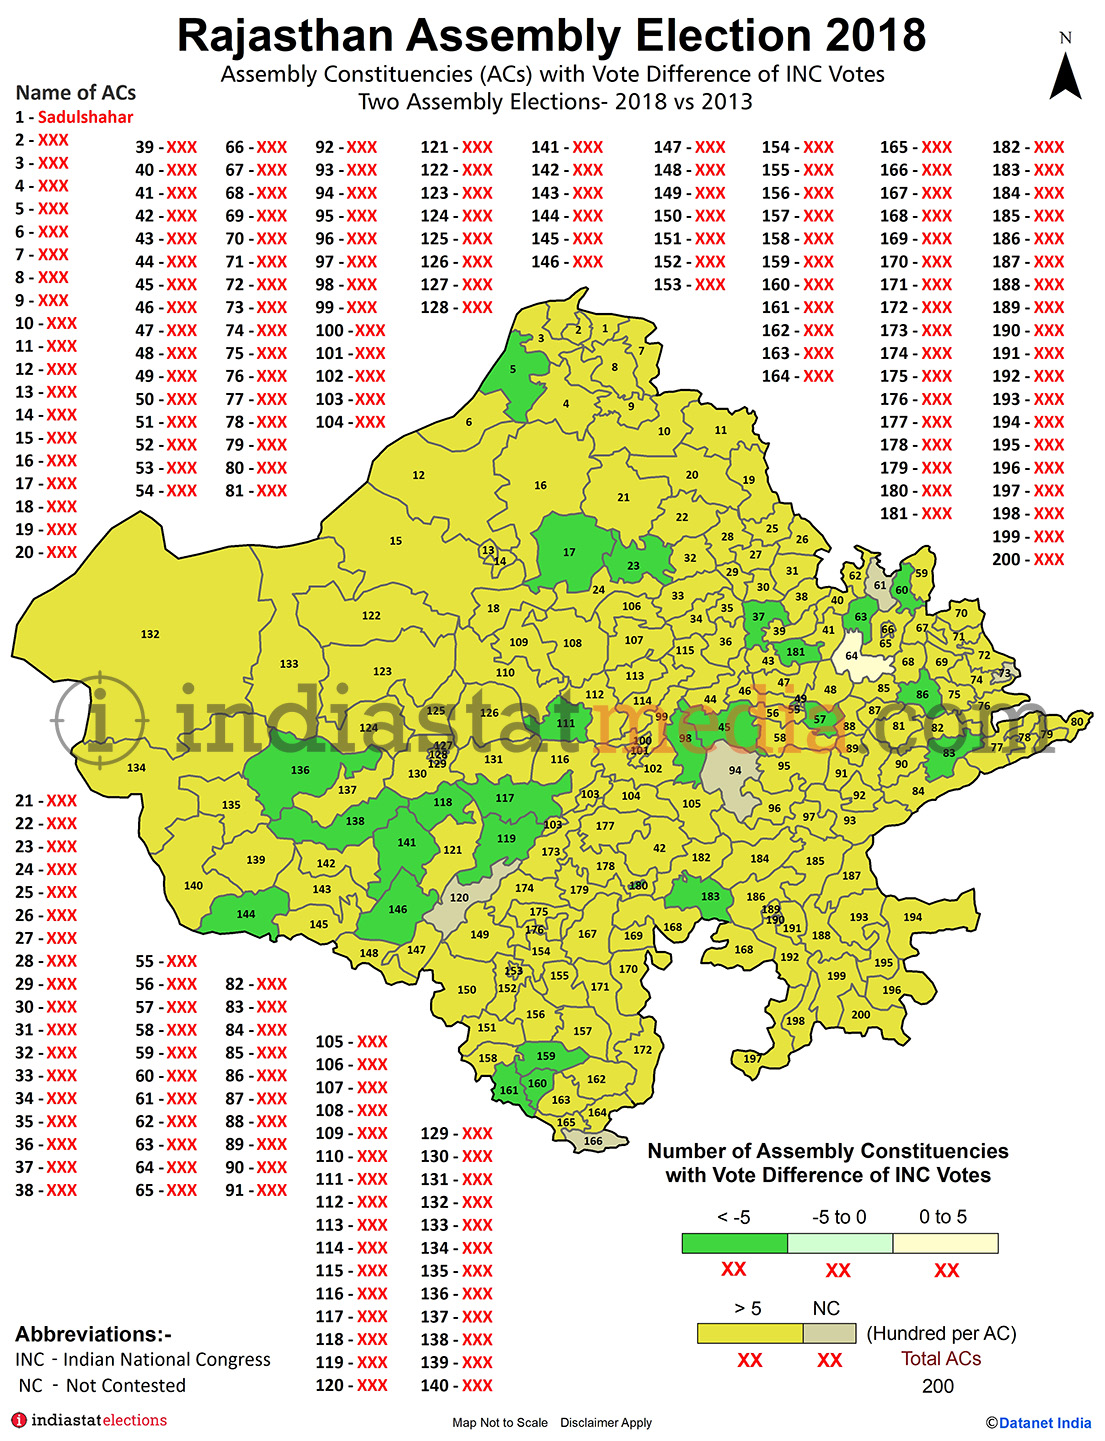 Assembly Constituencies with Vote Difference of INC Votes in Rajasthan (Assembly Elections - 2013 & 2018)